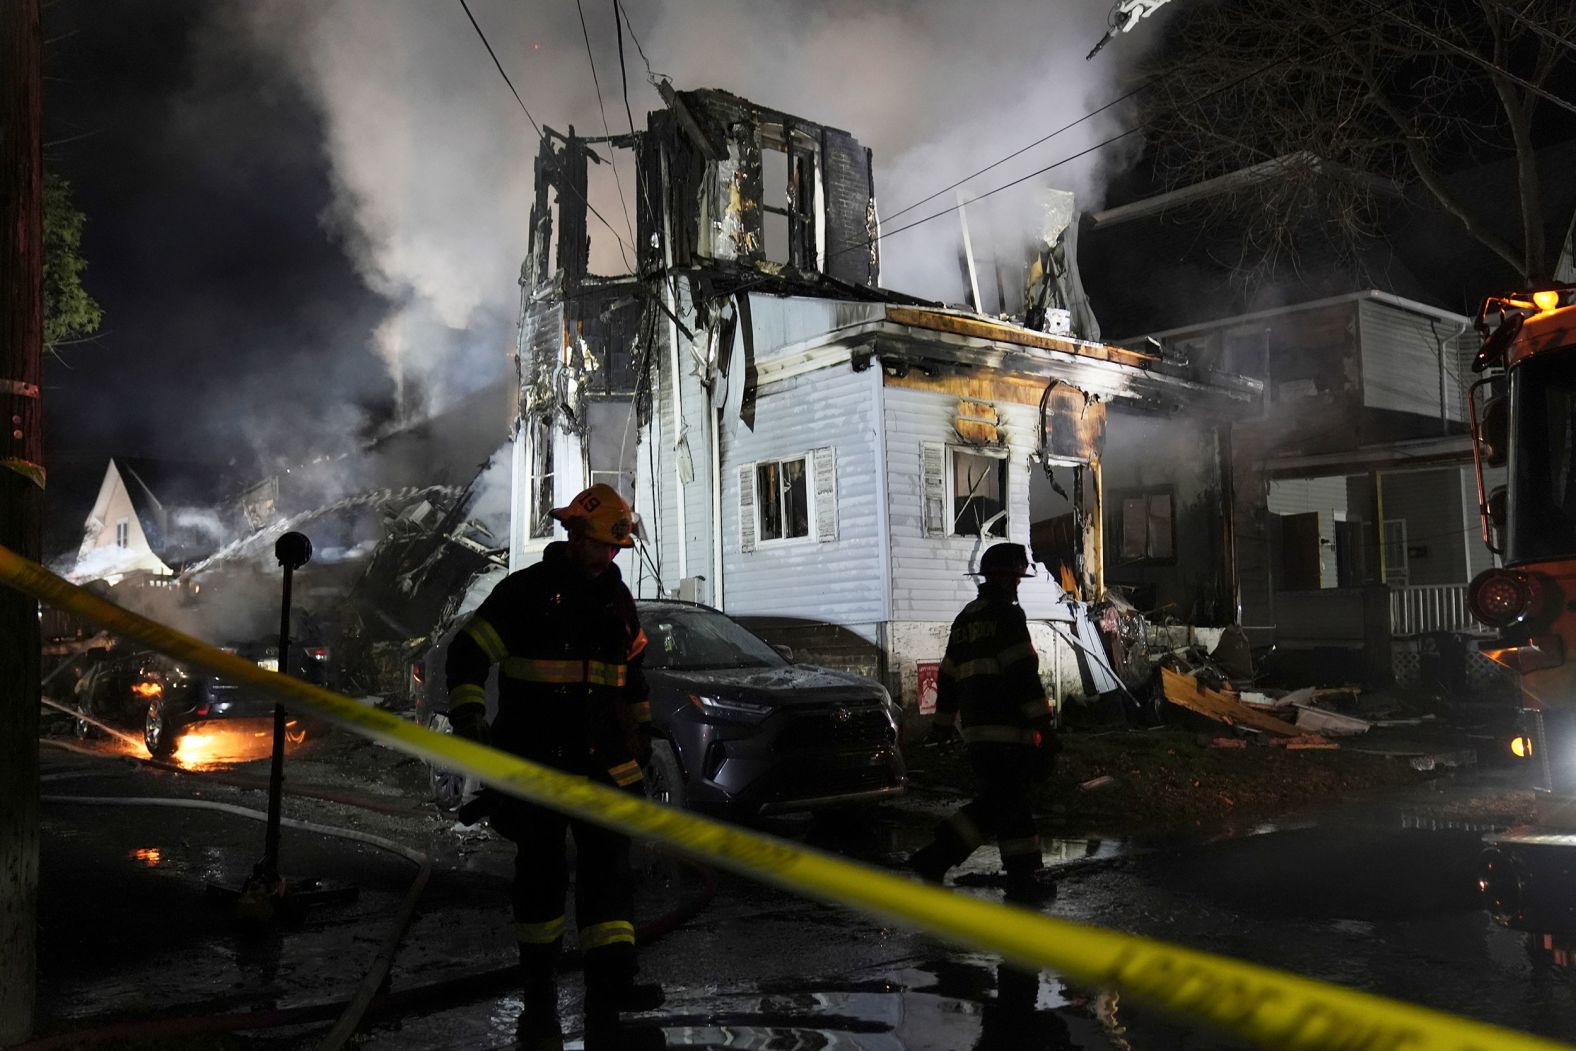 Firefighters work at the scene of a house fire in East Lansdowne, Pennsylvania, on Wednesday, February 7. <a href="index.php?page=&url=https%3A%2F%2Fwww.cnn.com%2F2024%2F02%2F07%2Fus%2Factive-shooter-officers-injured-pennsylvania-house%2Findex.html">At least six members of a family remained unaccounted for Thursday</a>, a day after police responded to the house after a report that a child had been shot there, a district attorney said. Two officers were hit by gunfire after responding. Investigators have recovered a torso and a rifle from the home, the district attorney said Thursday.